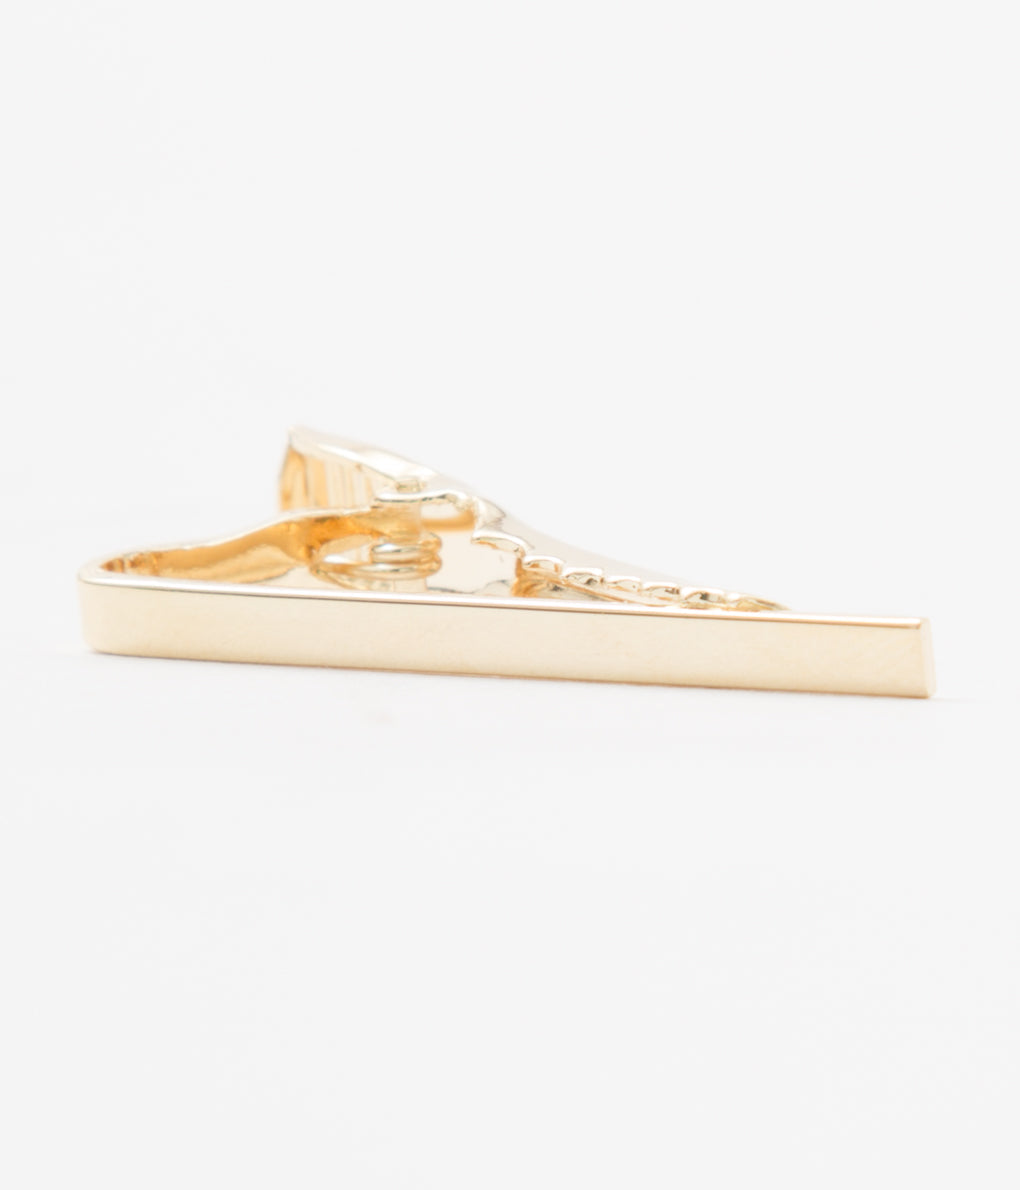 FINE AND DANDY "TIE BARS SKINNY" (GOLD)